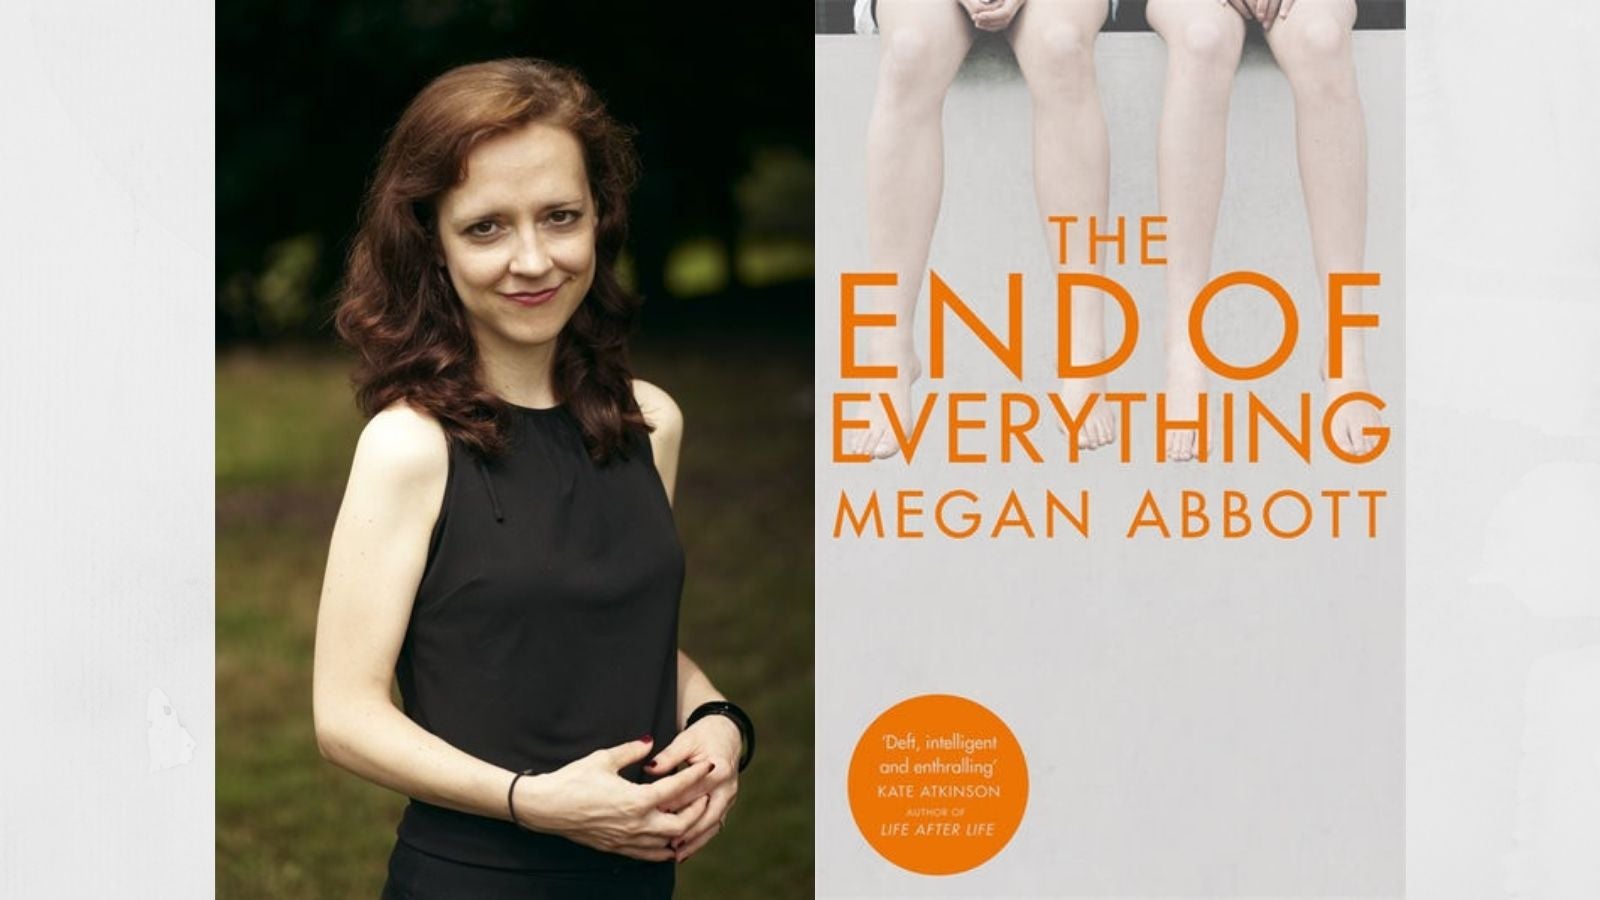 the end of everything megan abbott review